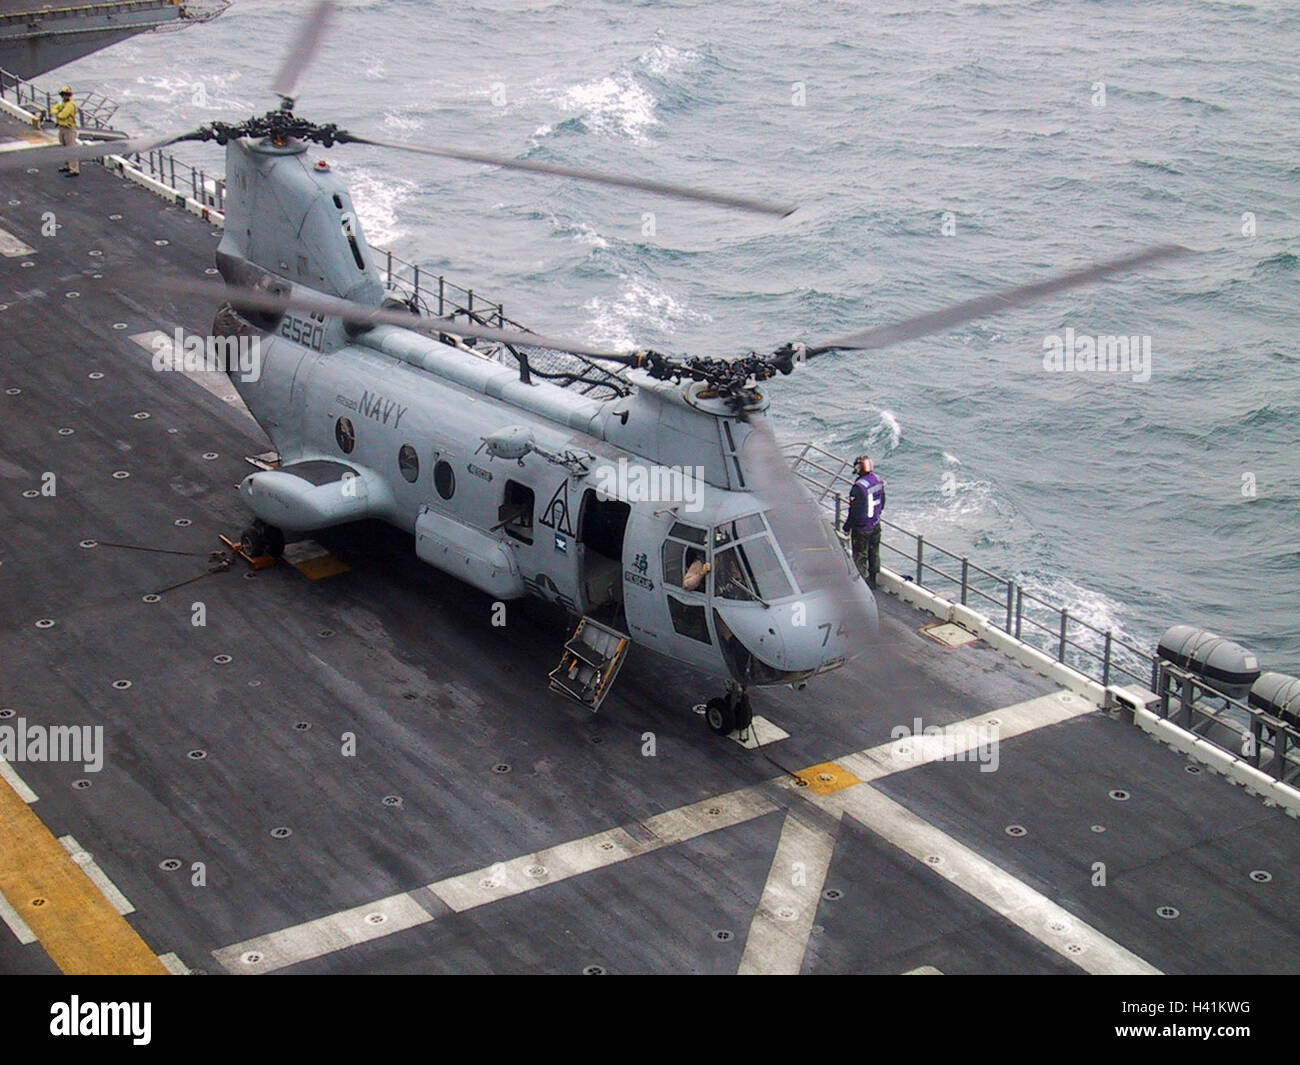 28th January 2003 Operation Enduring Freedom: a CH-46D/E Sea Knight helicopter on the USS Nassau, in the Persian Gulf. Stock Photo